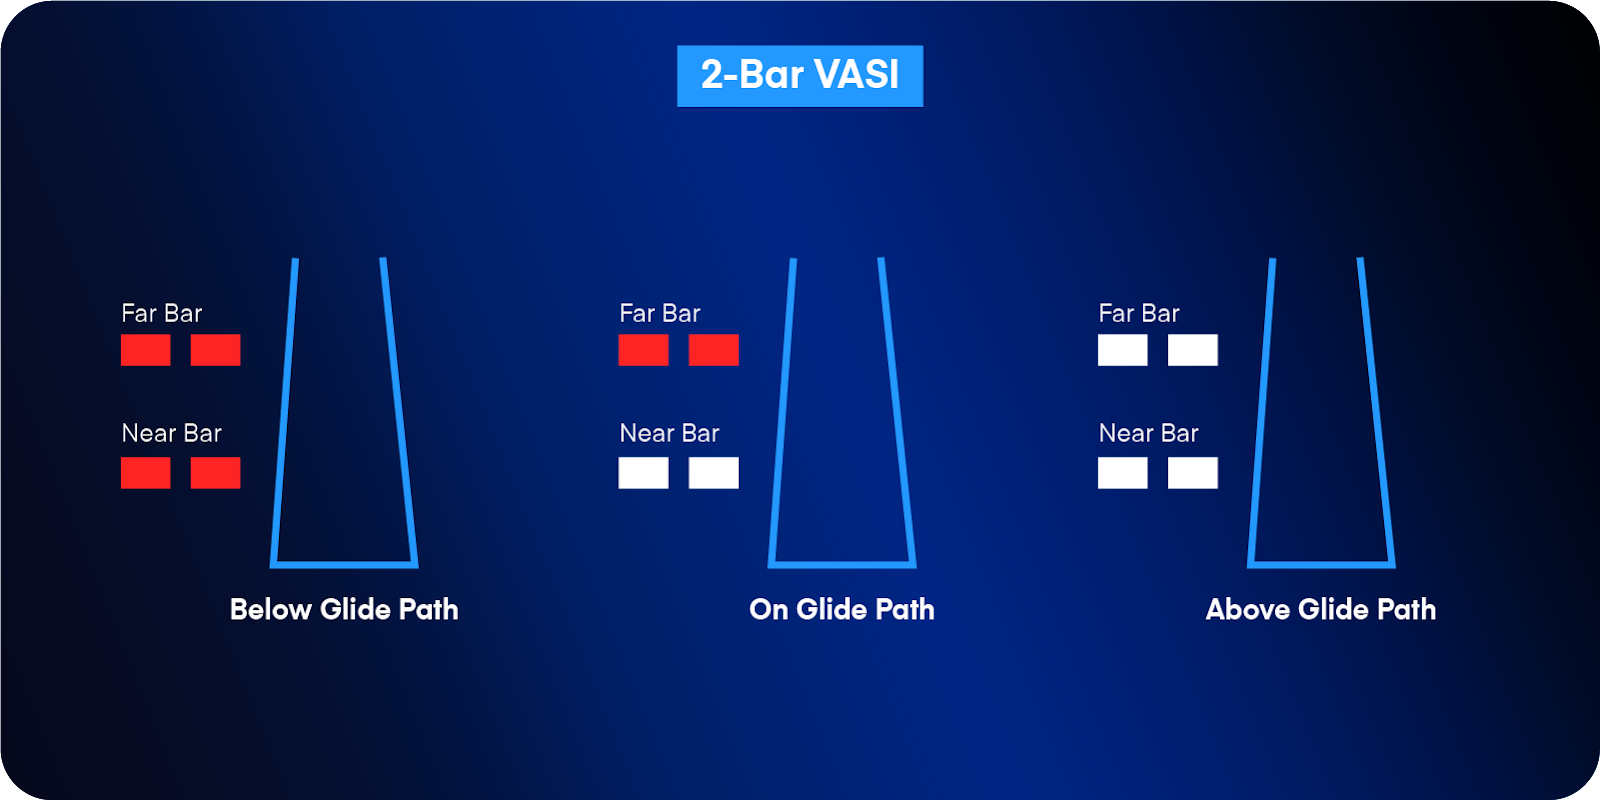 A diagram showing how a 2-bar VASI informs pilots of their glide path position. 